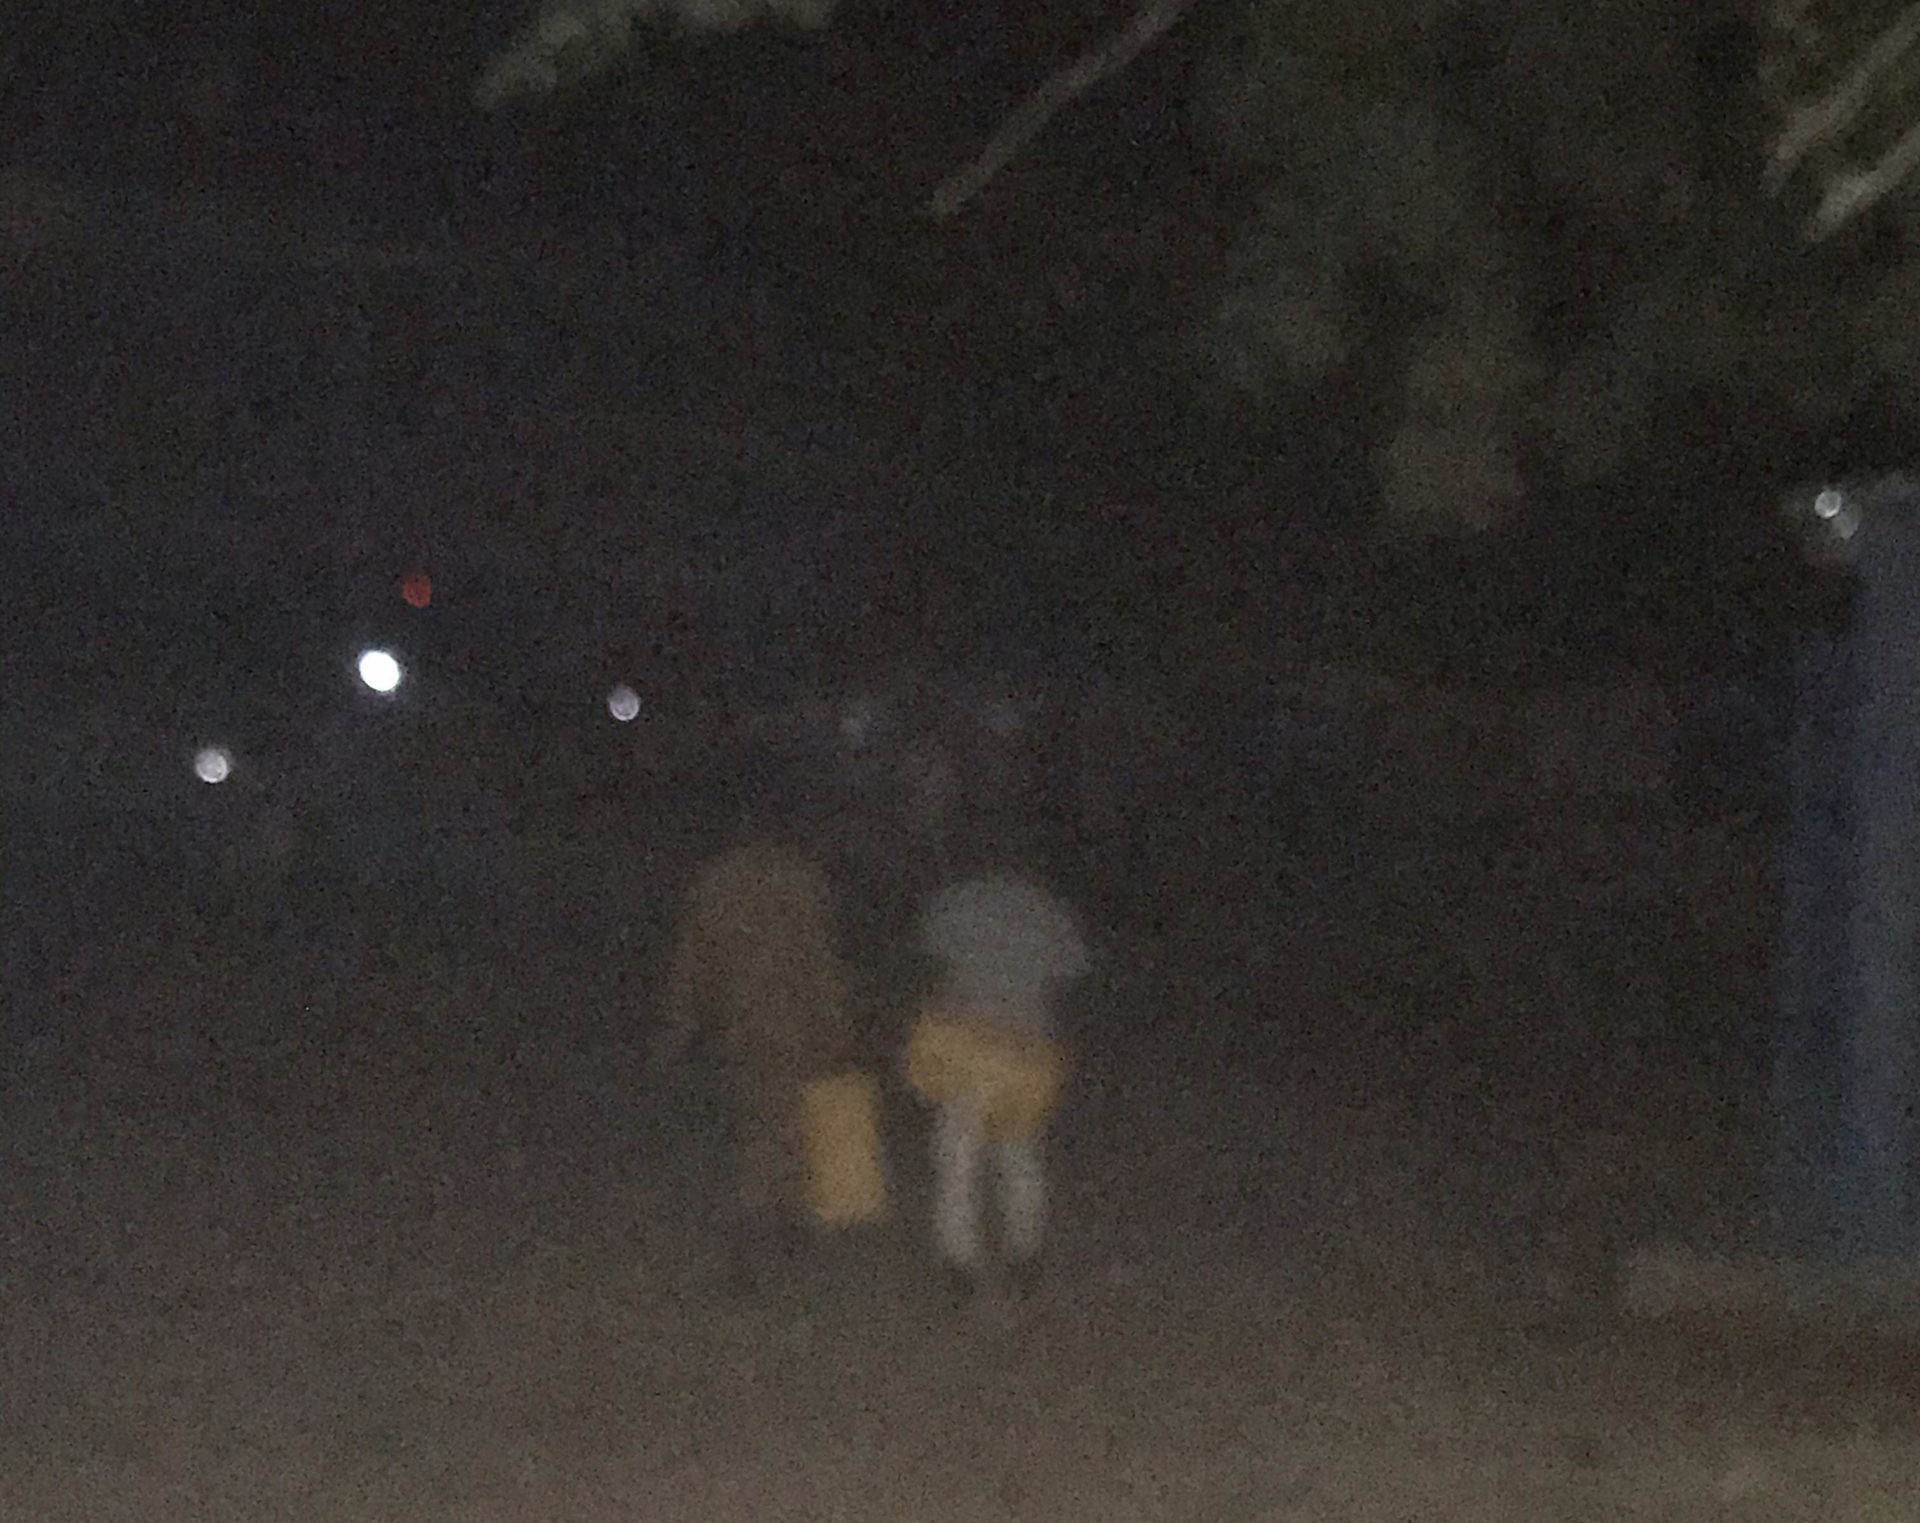 At night, students walk some miles away from their hostel to get water